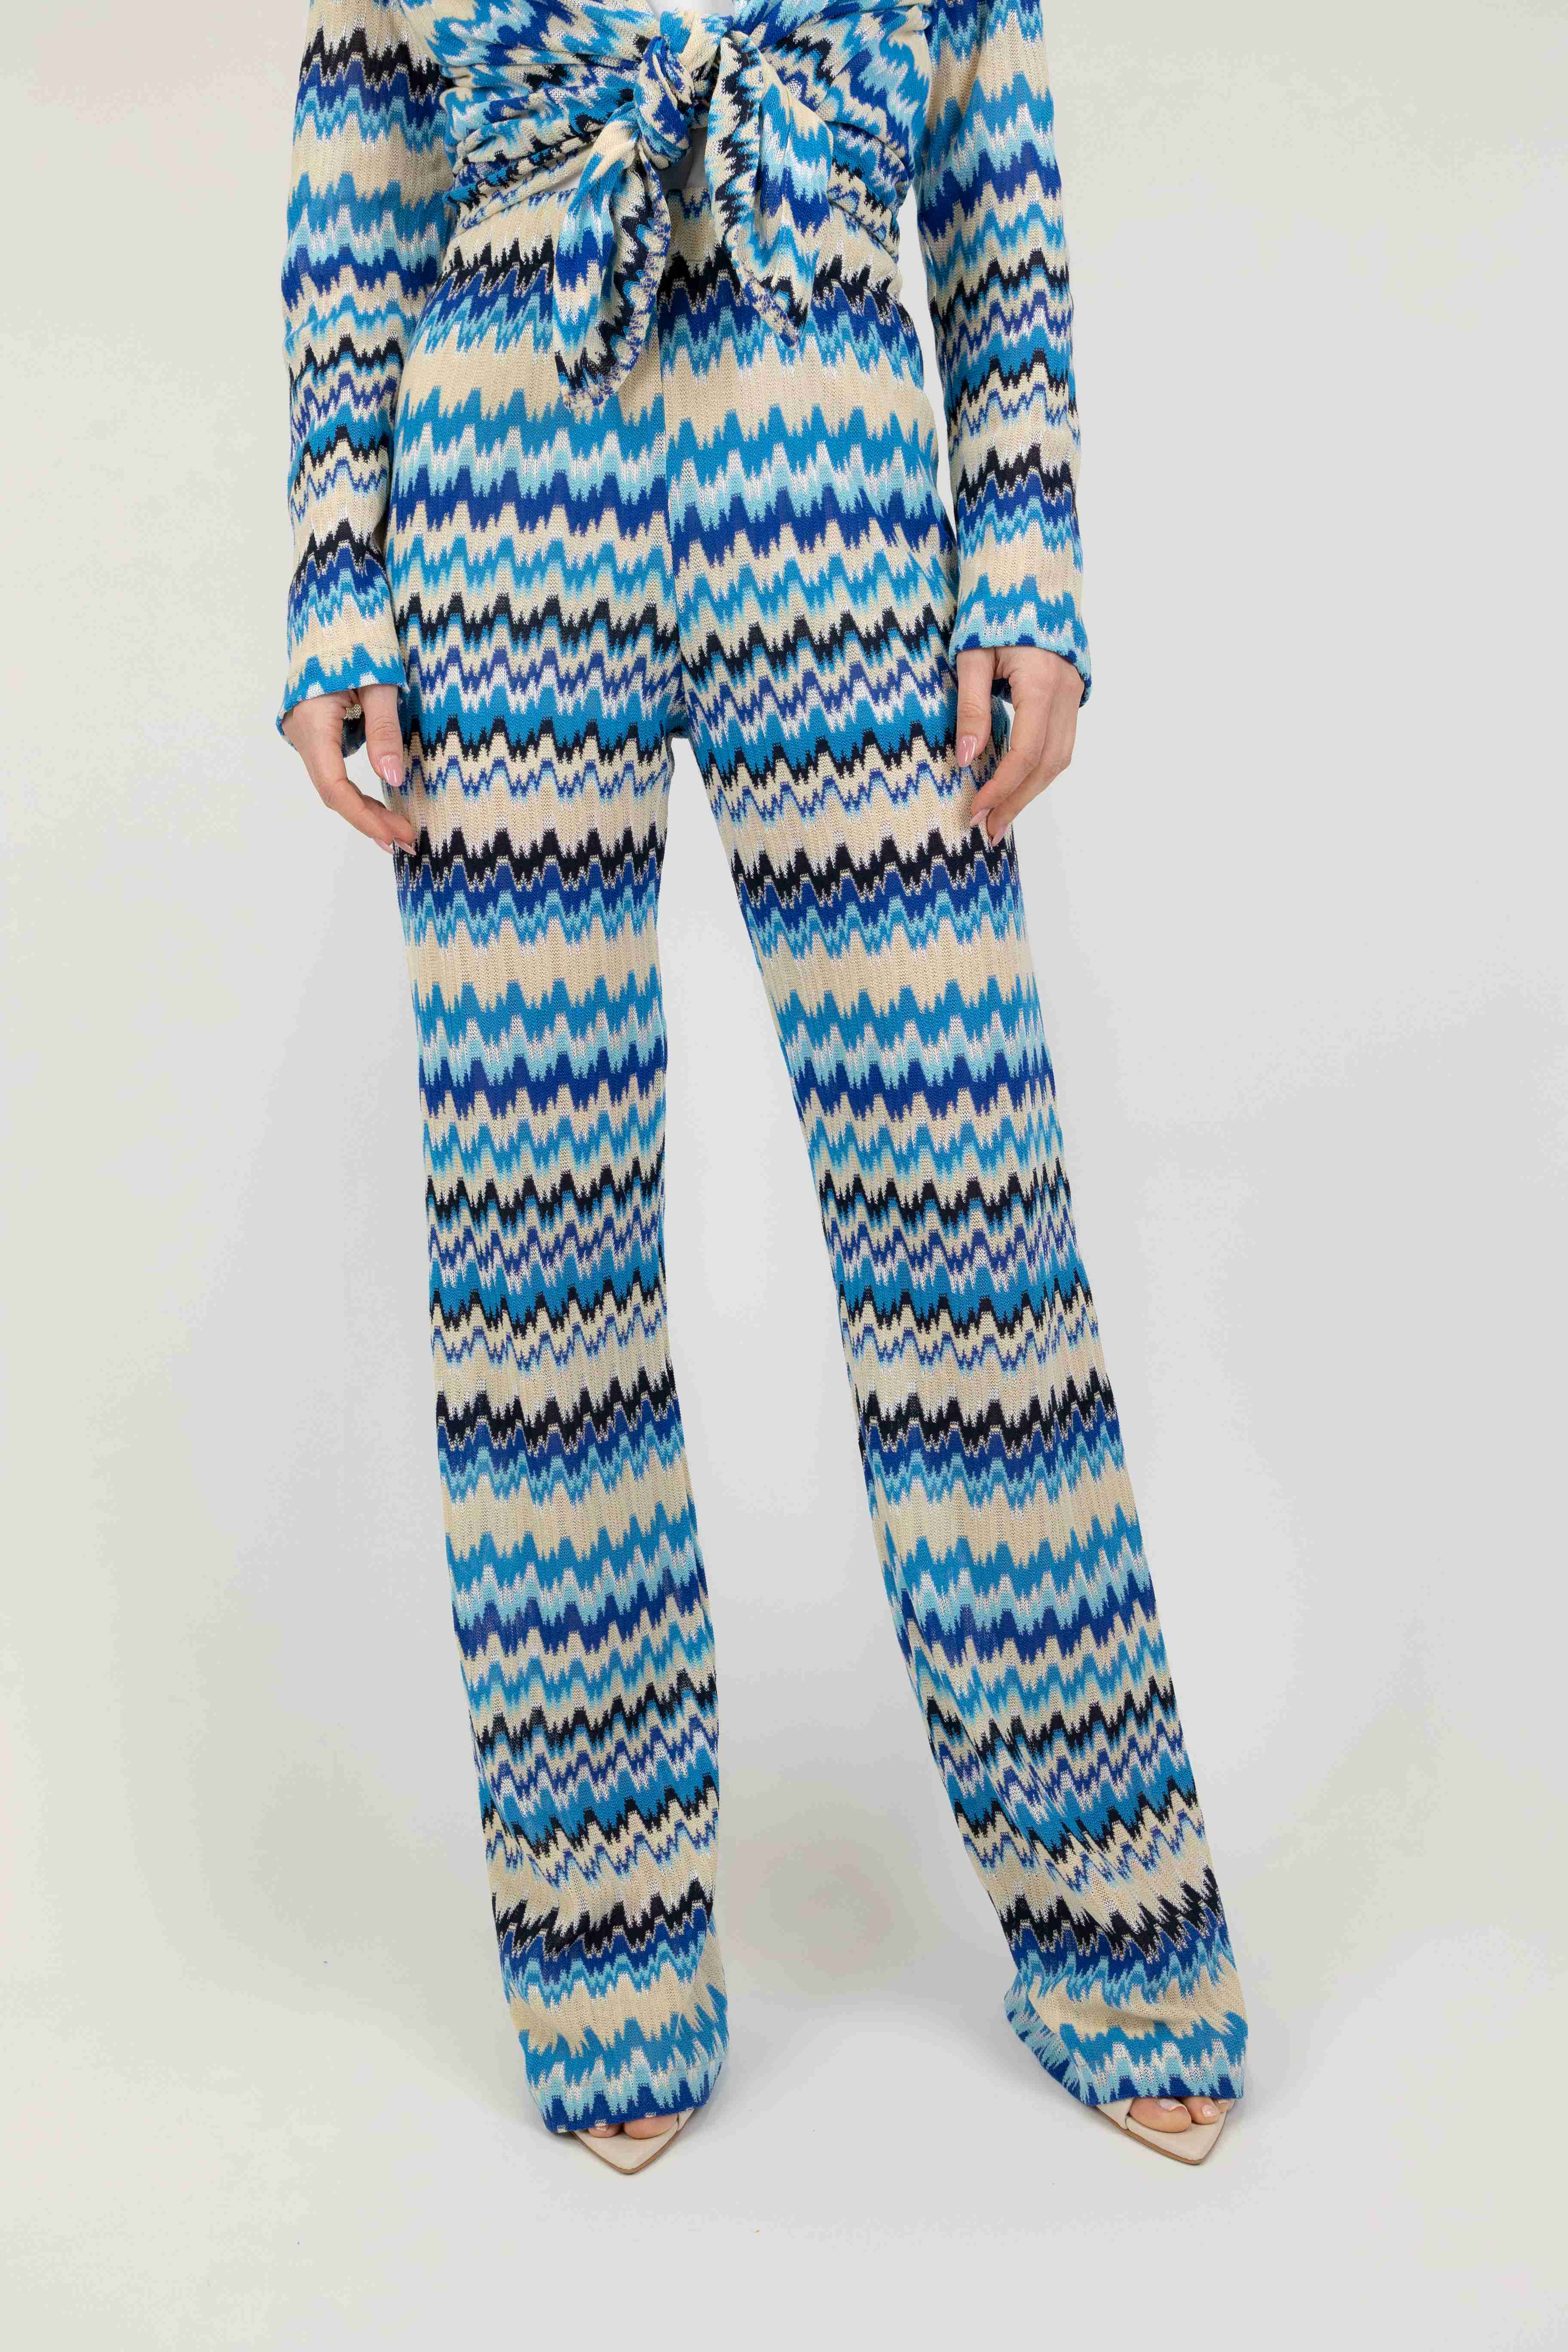 Haveone - Zig zag patterned flared trousers